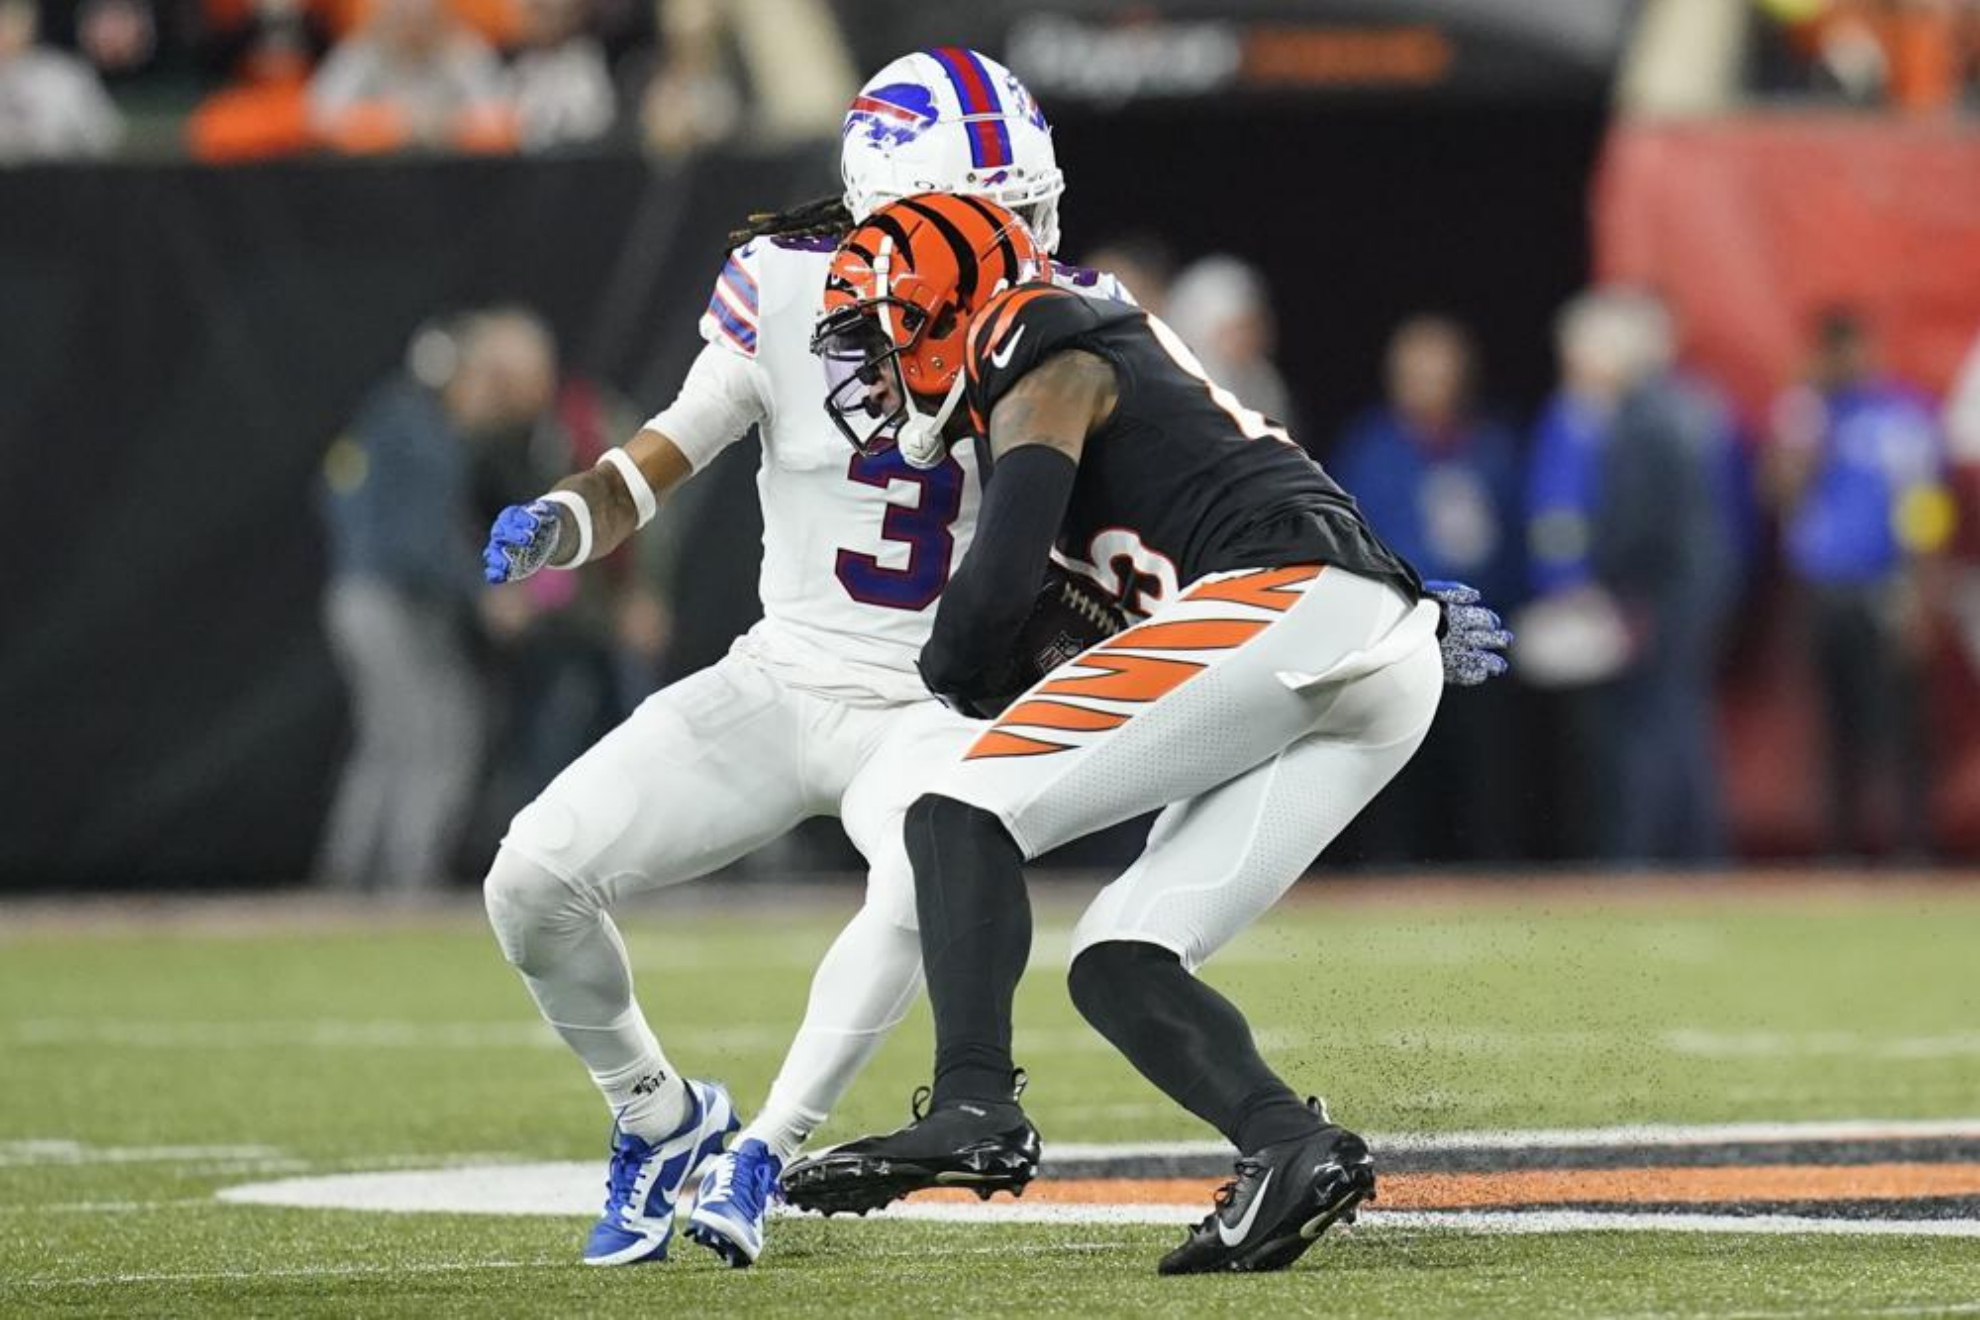 The Bills will host the Bengals in the Divisional Round of the NFL playoffs.